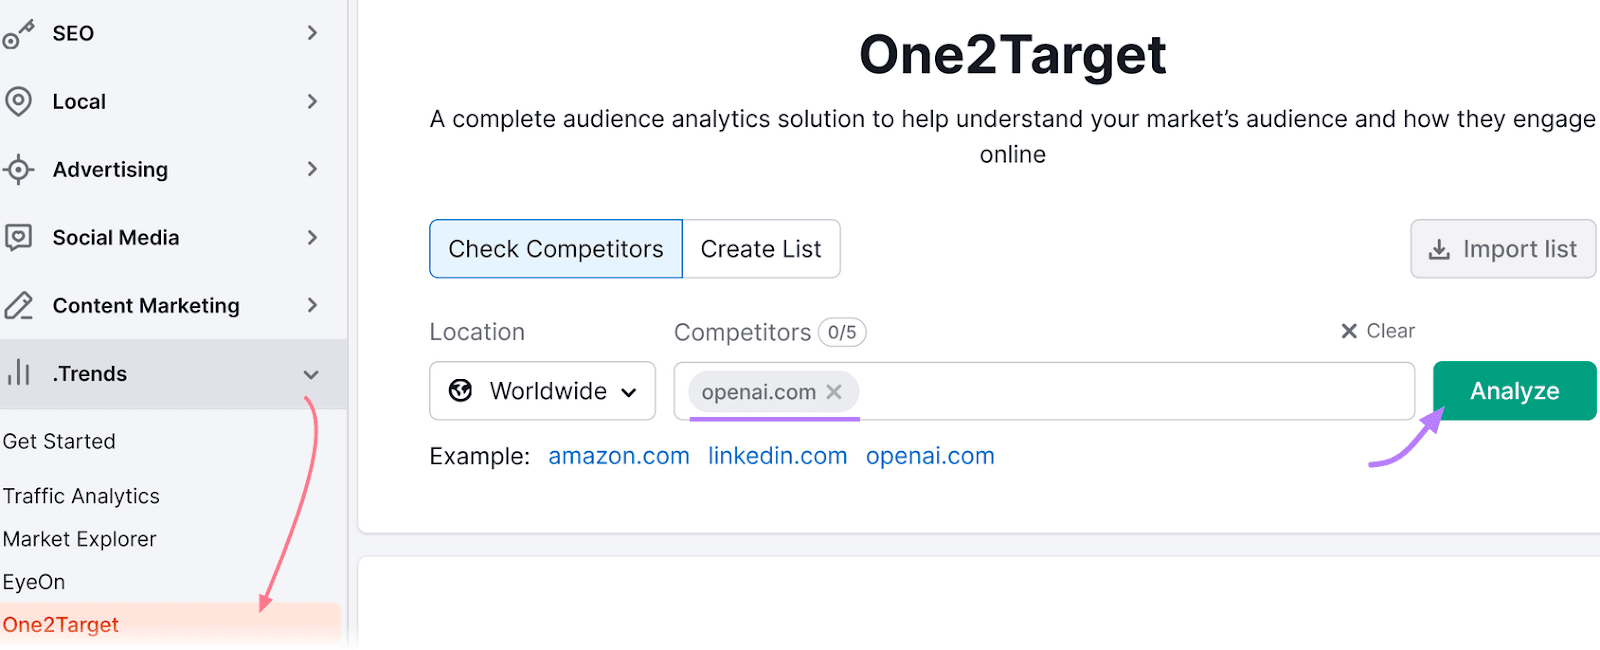 One2Target interface, showing a main panel for analyzing competitors, with an "Analyze" button pointed out by purple arrow.